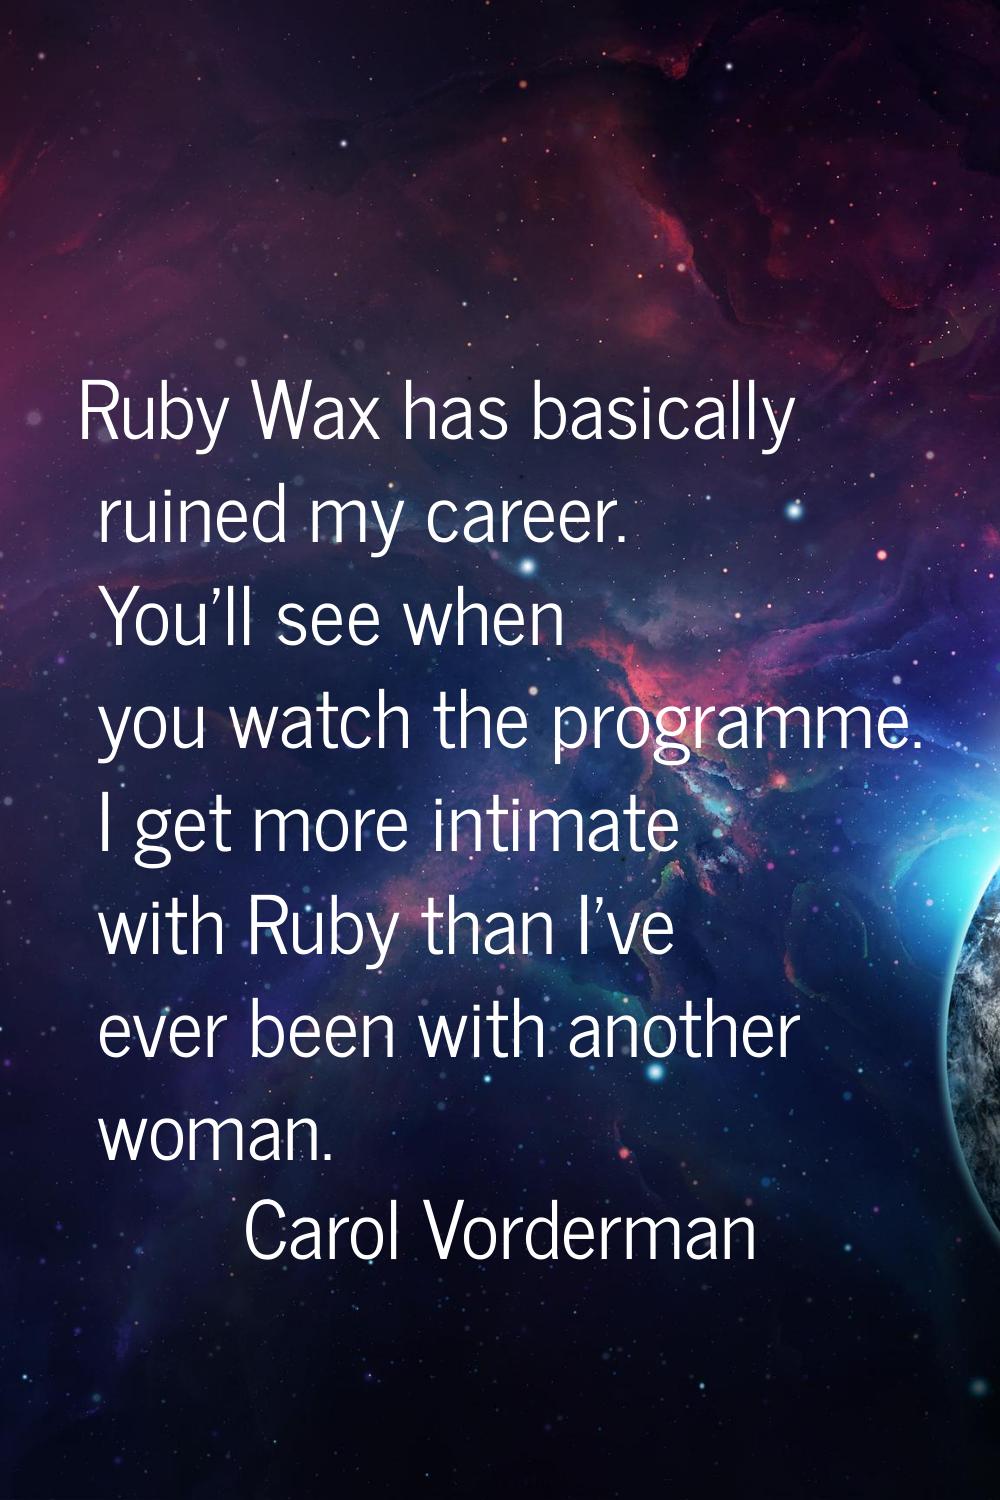 Ruby Wax has basically ruined my career. You'll see when you watch the programme. I get more intima